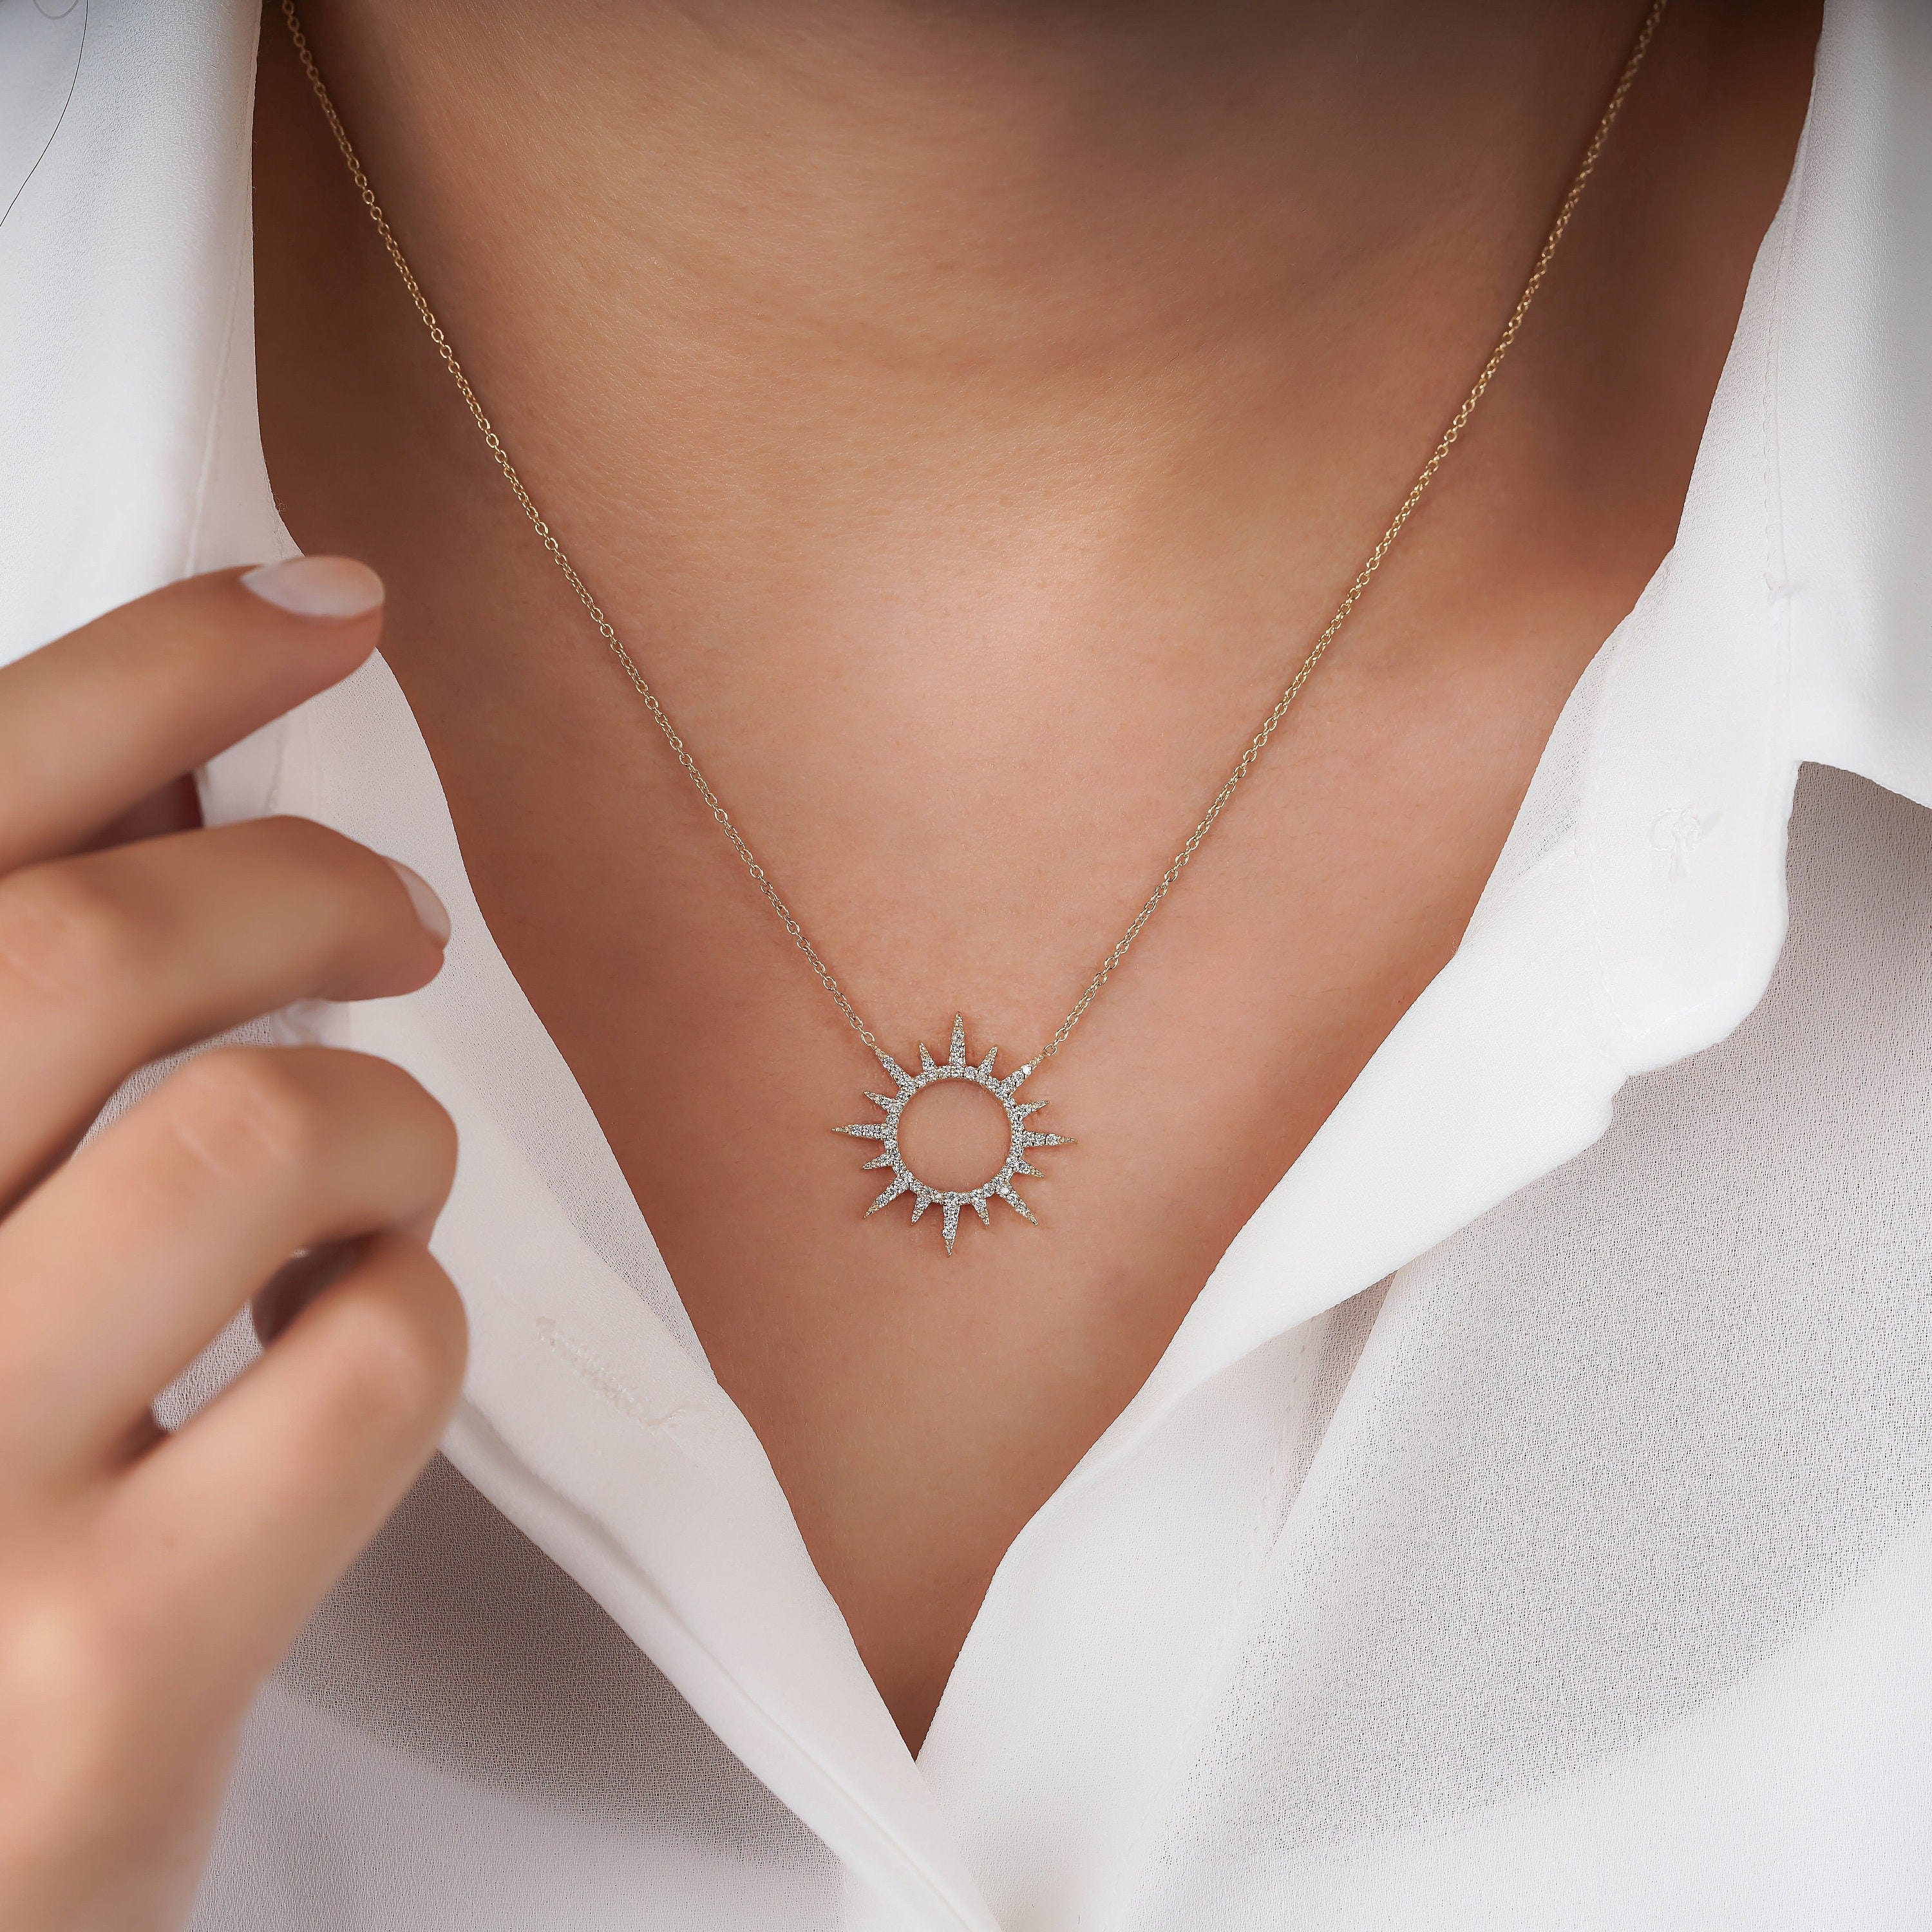 Diamond Sun Necklace Available in 14K and 18K Gold